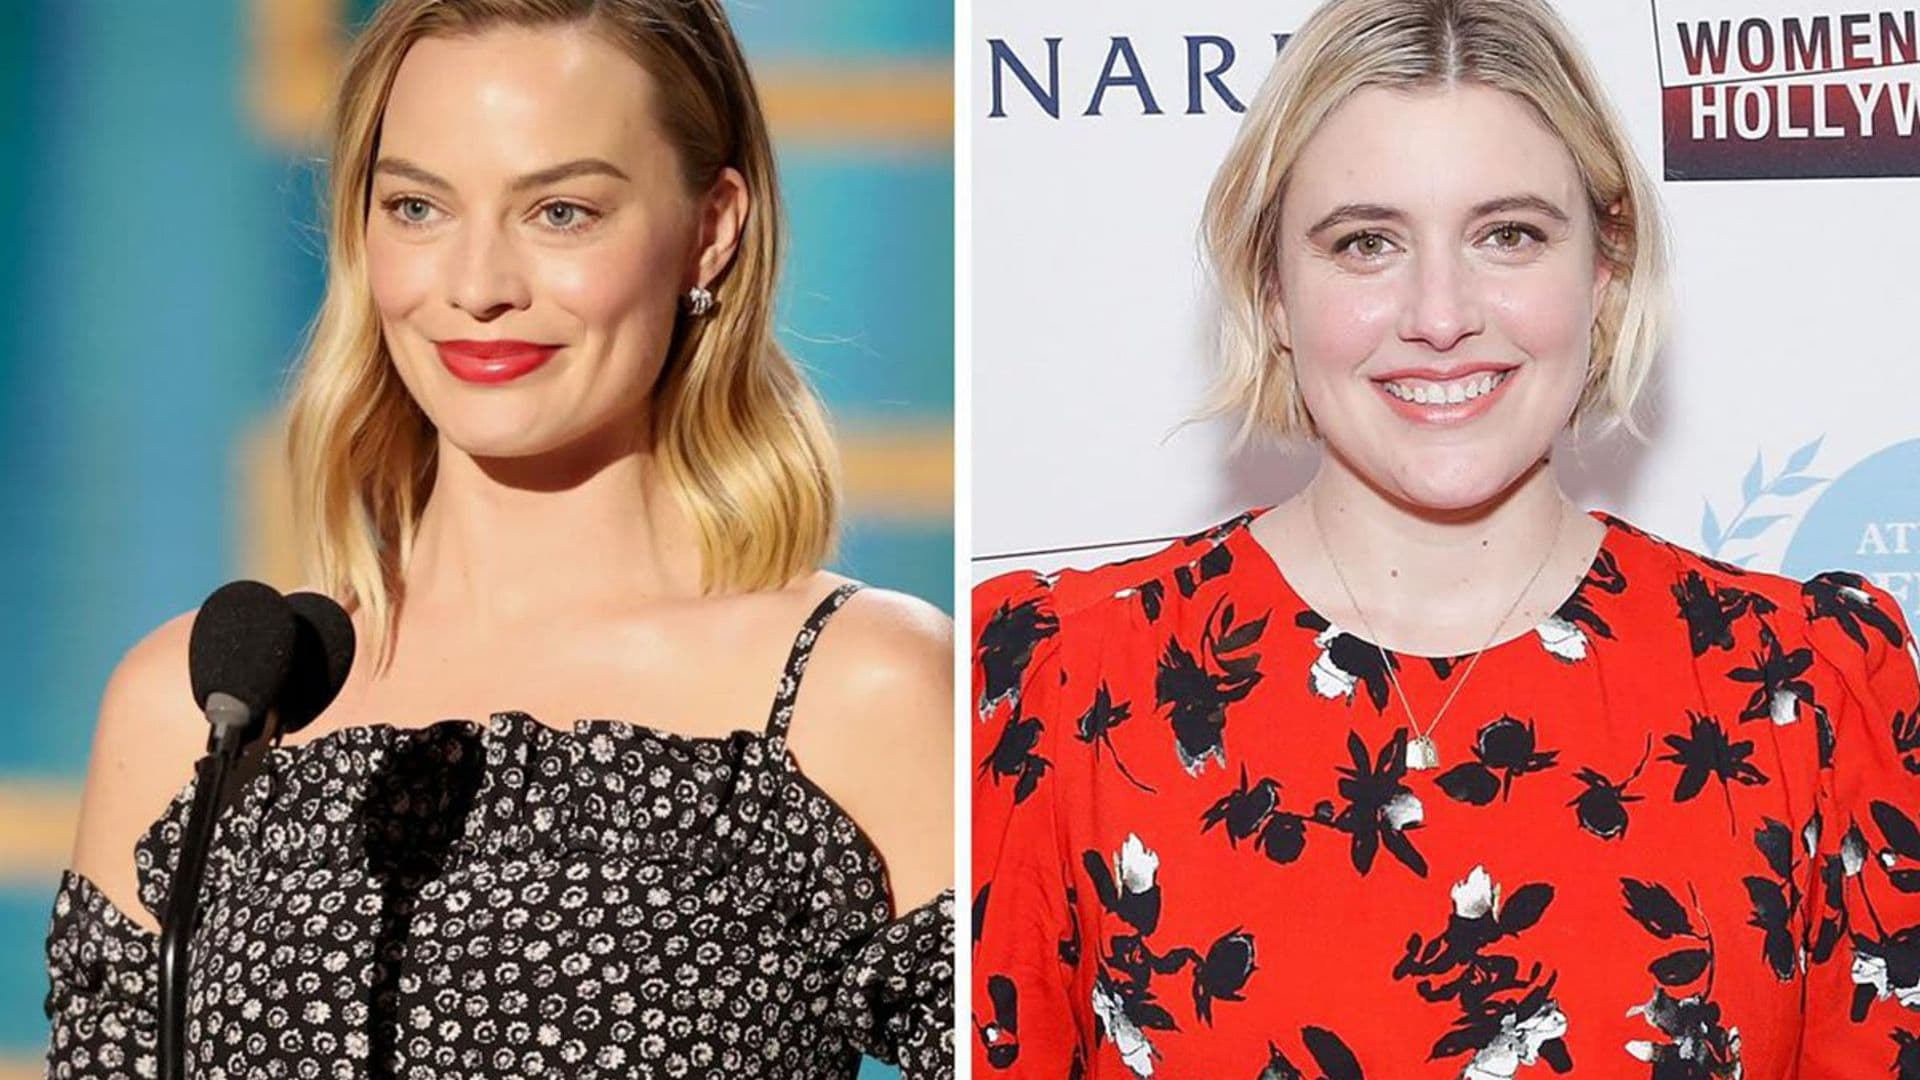 Margot Robbie announced the perfect director for her live-action Barbie film